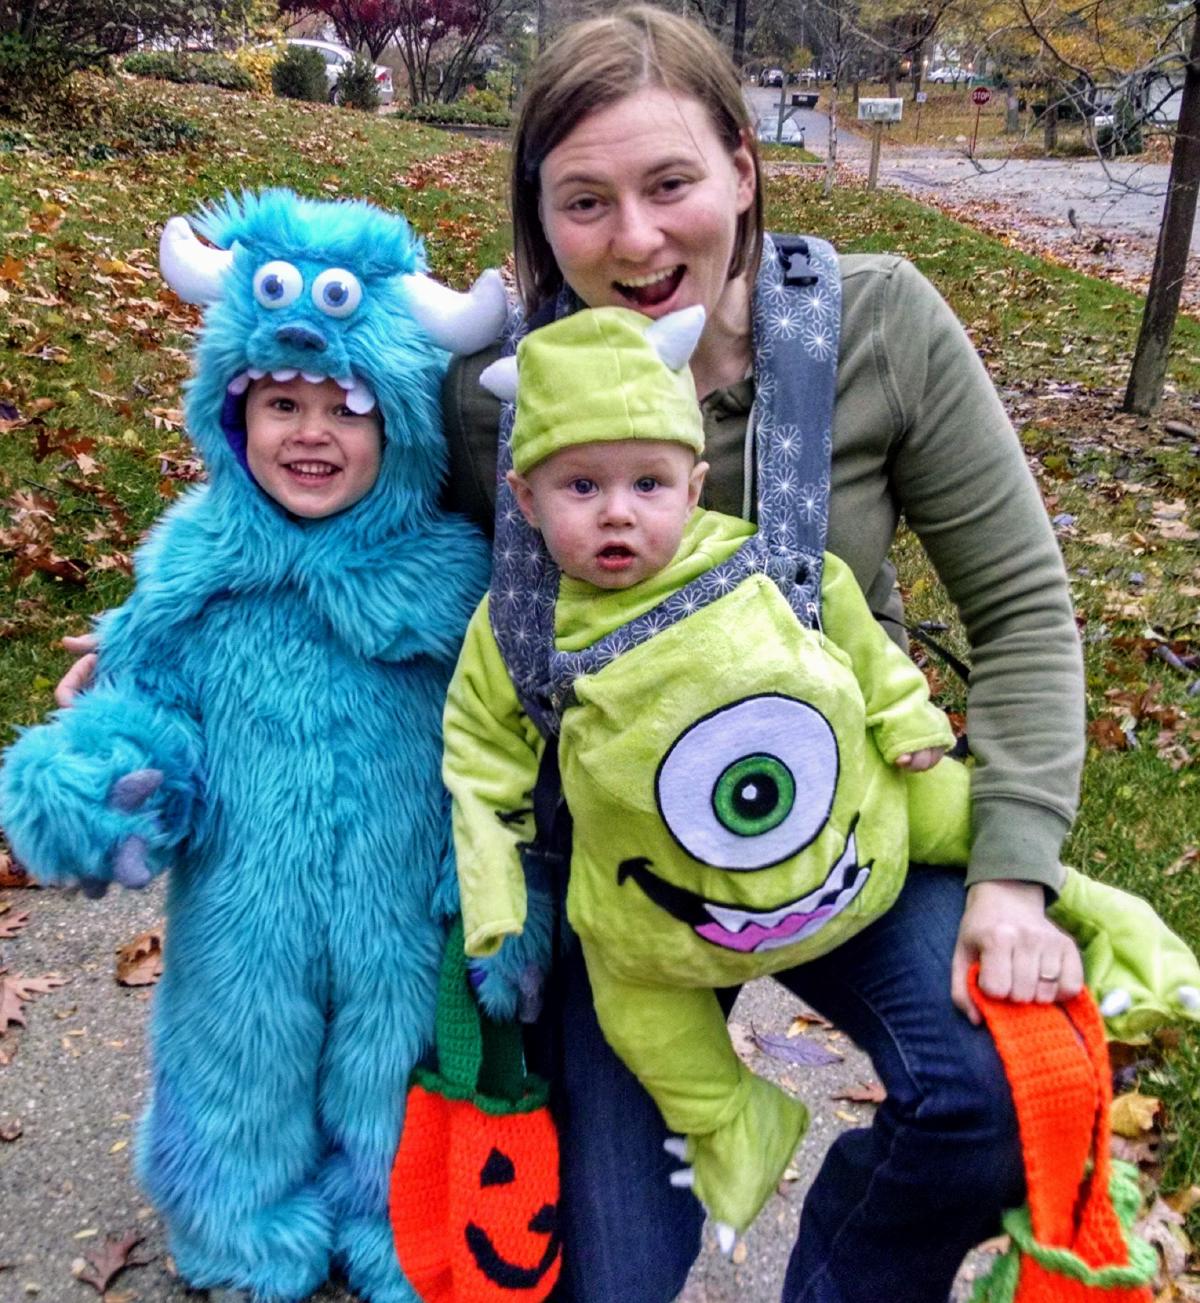 Halloween 2014: Monsters Inc Sully and Mike Wazowski!